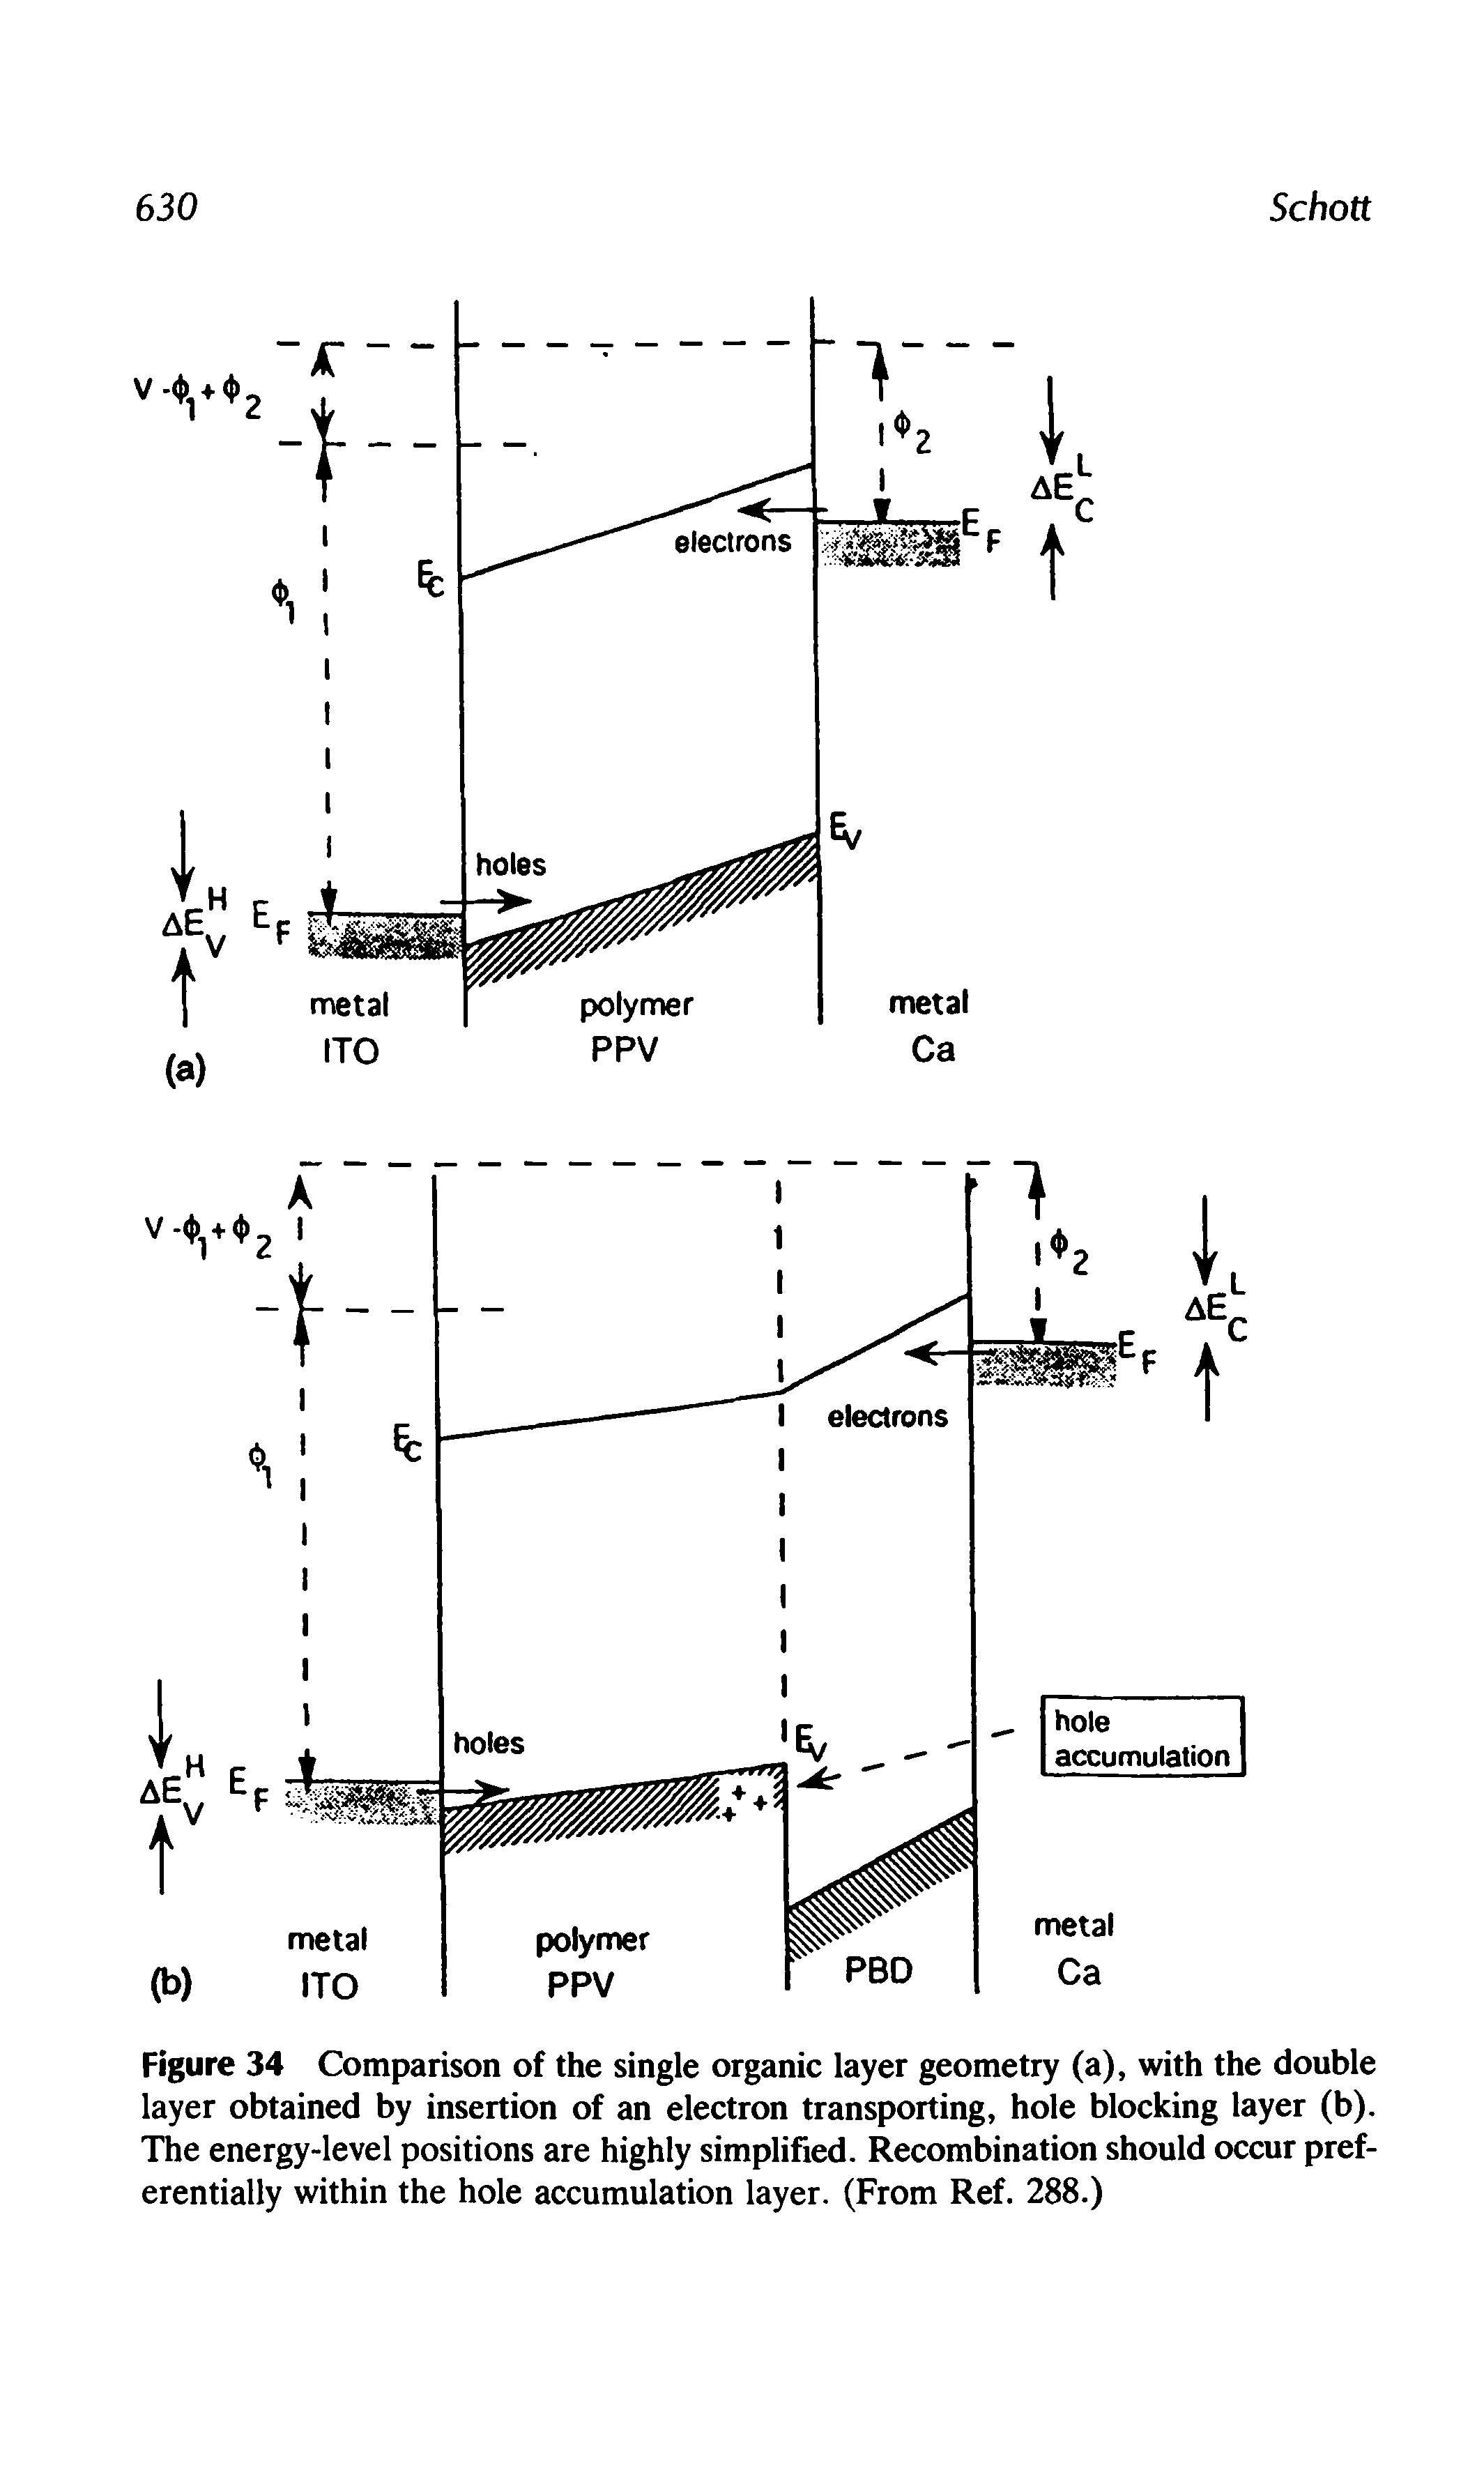 Figure 34 Comparison of the single organic layer geometry (a), with the double layer obtained by insertion of an electron transporting, hole blocking layer (b). The energy-level positions are highly simplified. Recombination should occur preferentially within the hole accumulation layer. (From Ref. 288.)...